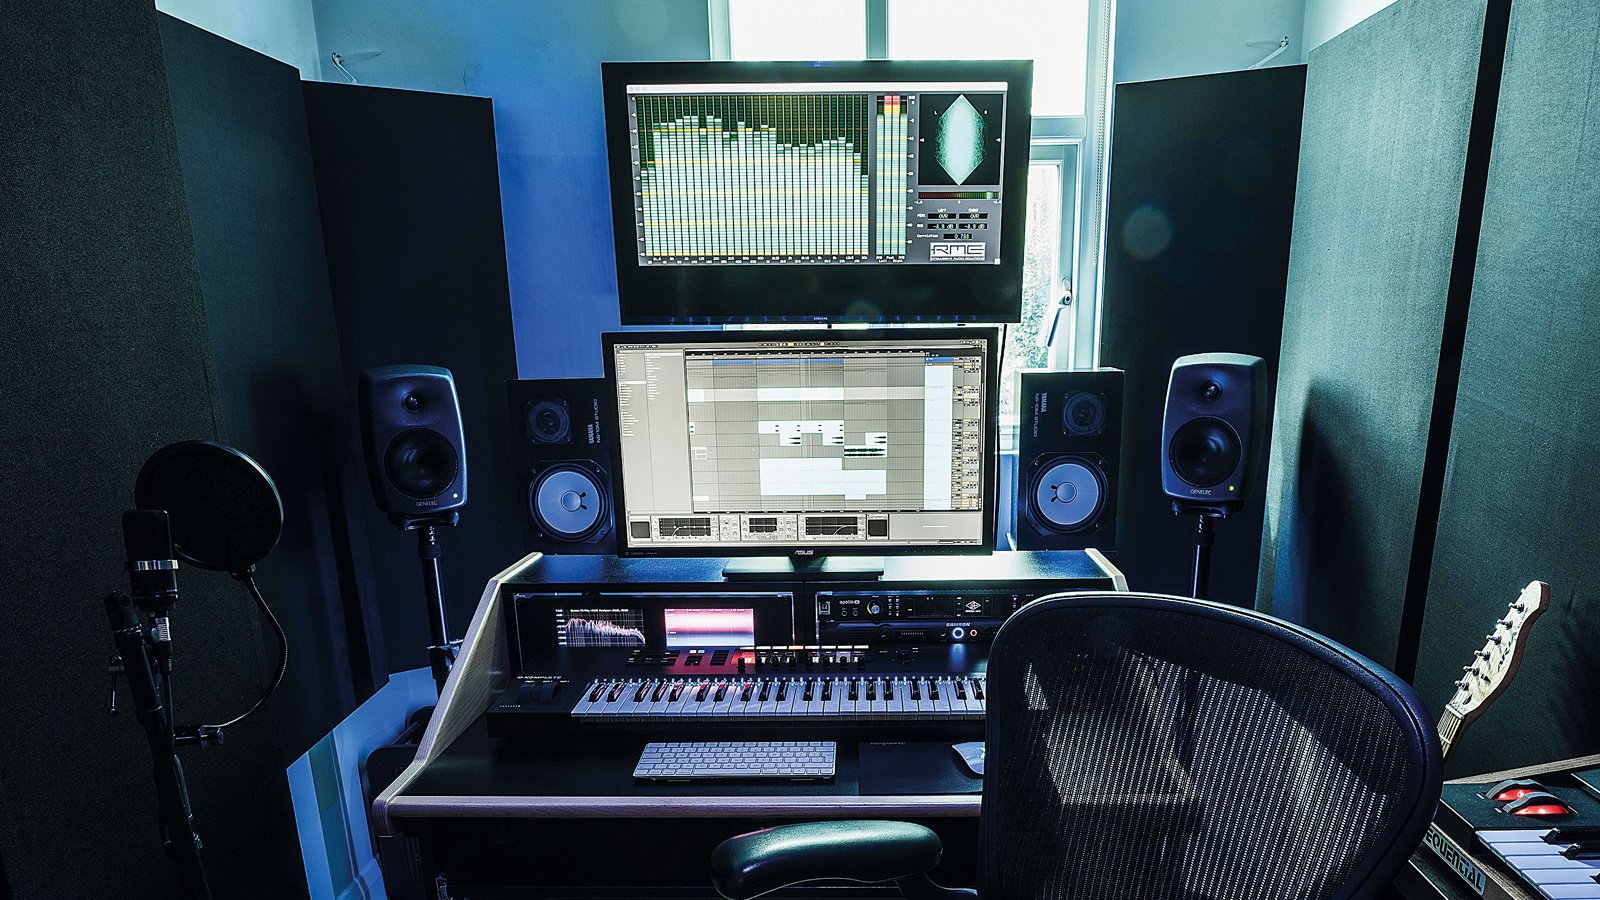 Building the Best PC for Music Production and Audio Editing